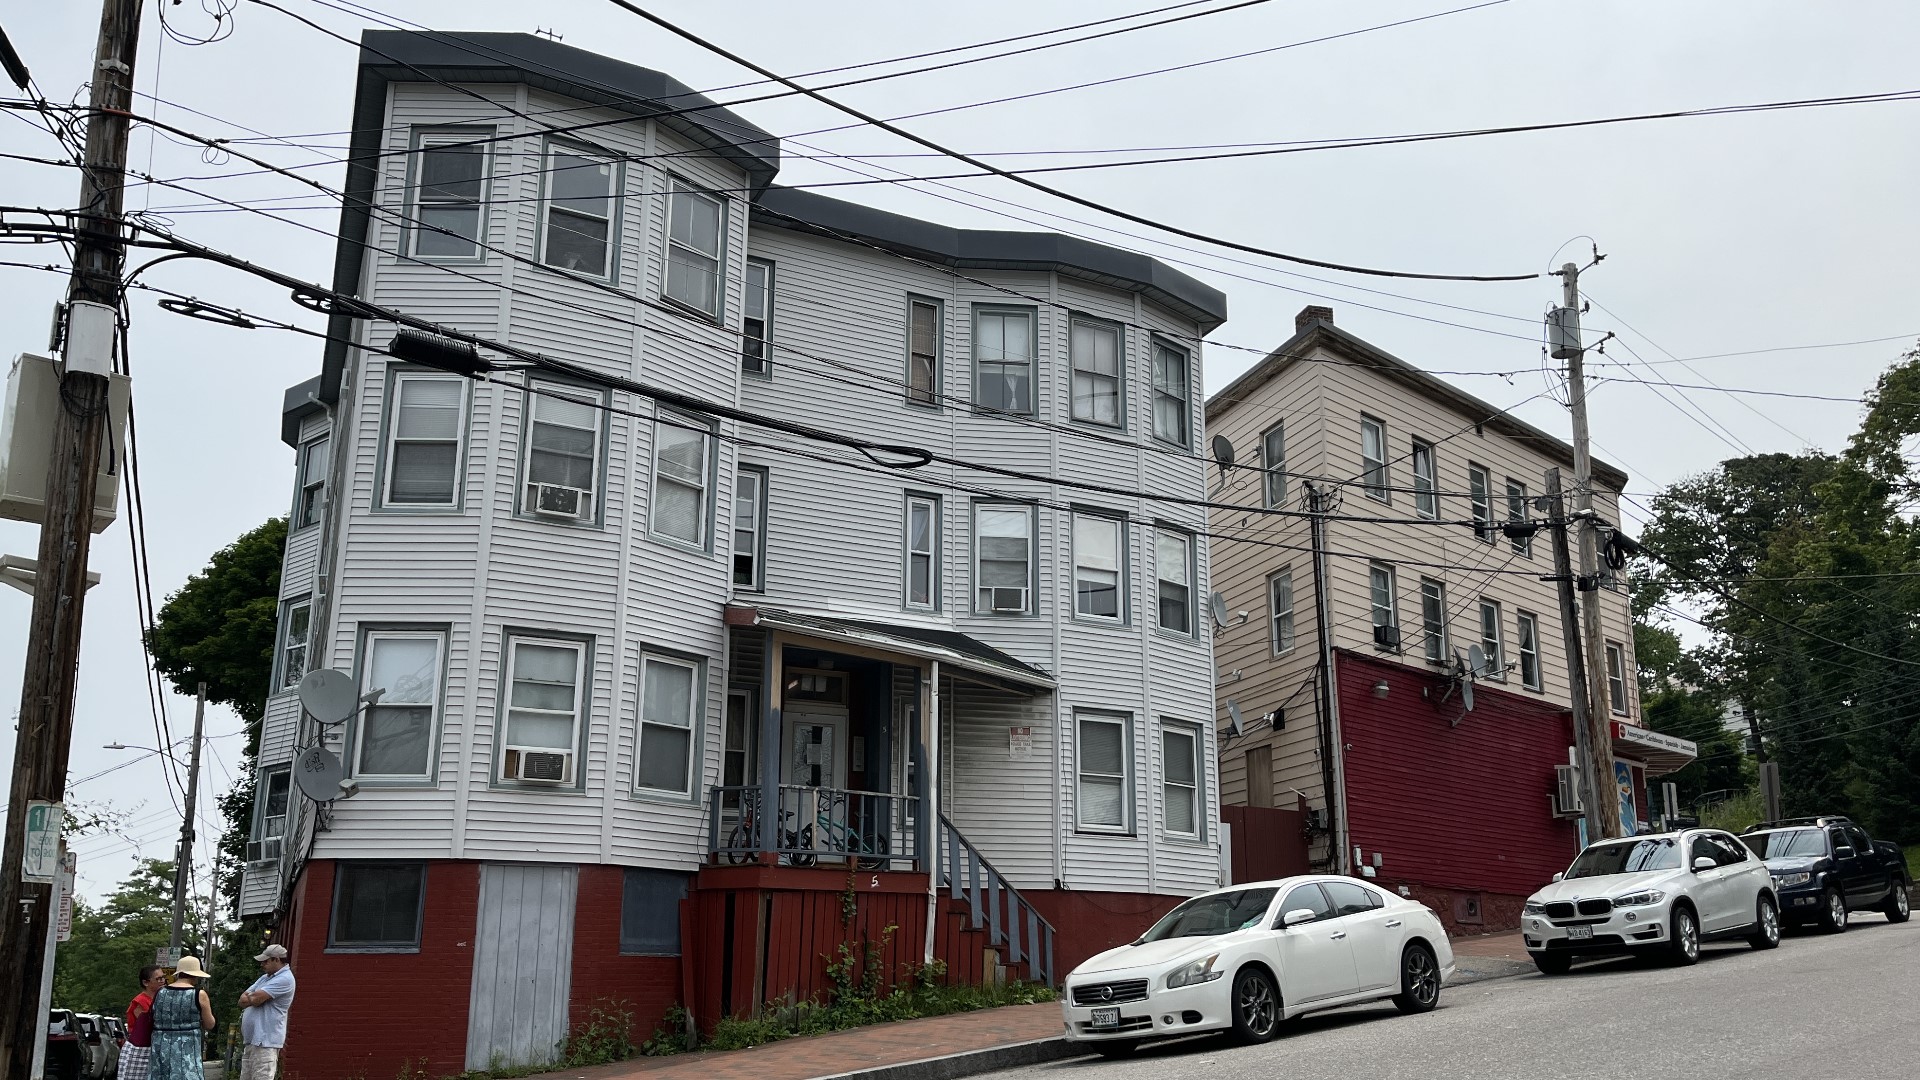 The Quality Housing Coalition announced the expansion of Project HOME on Tuesday to include paying homeowners rent on behalf of asylum seekers.